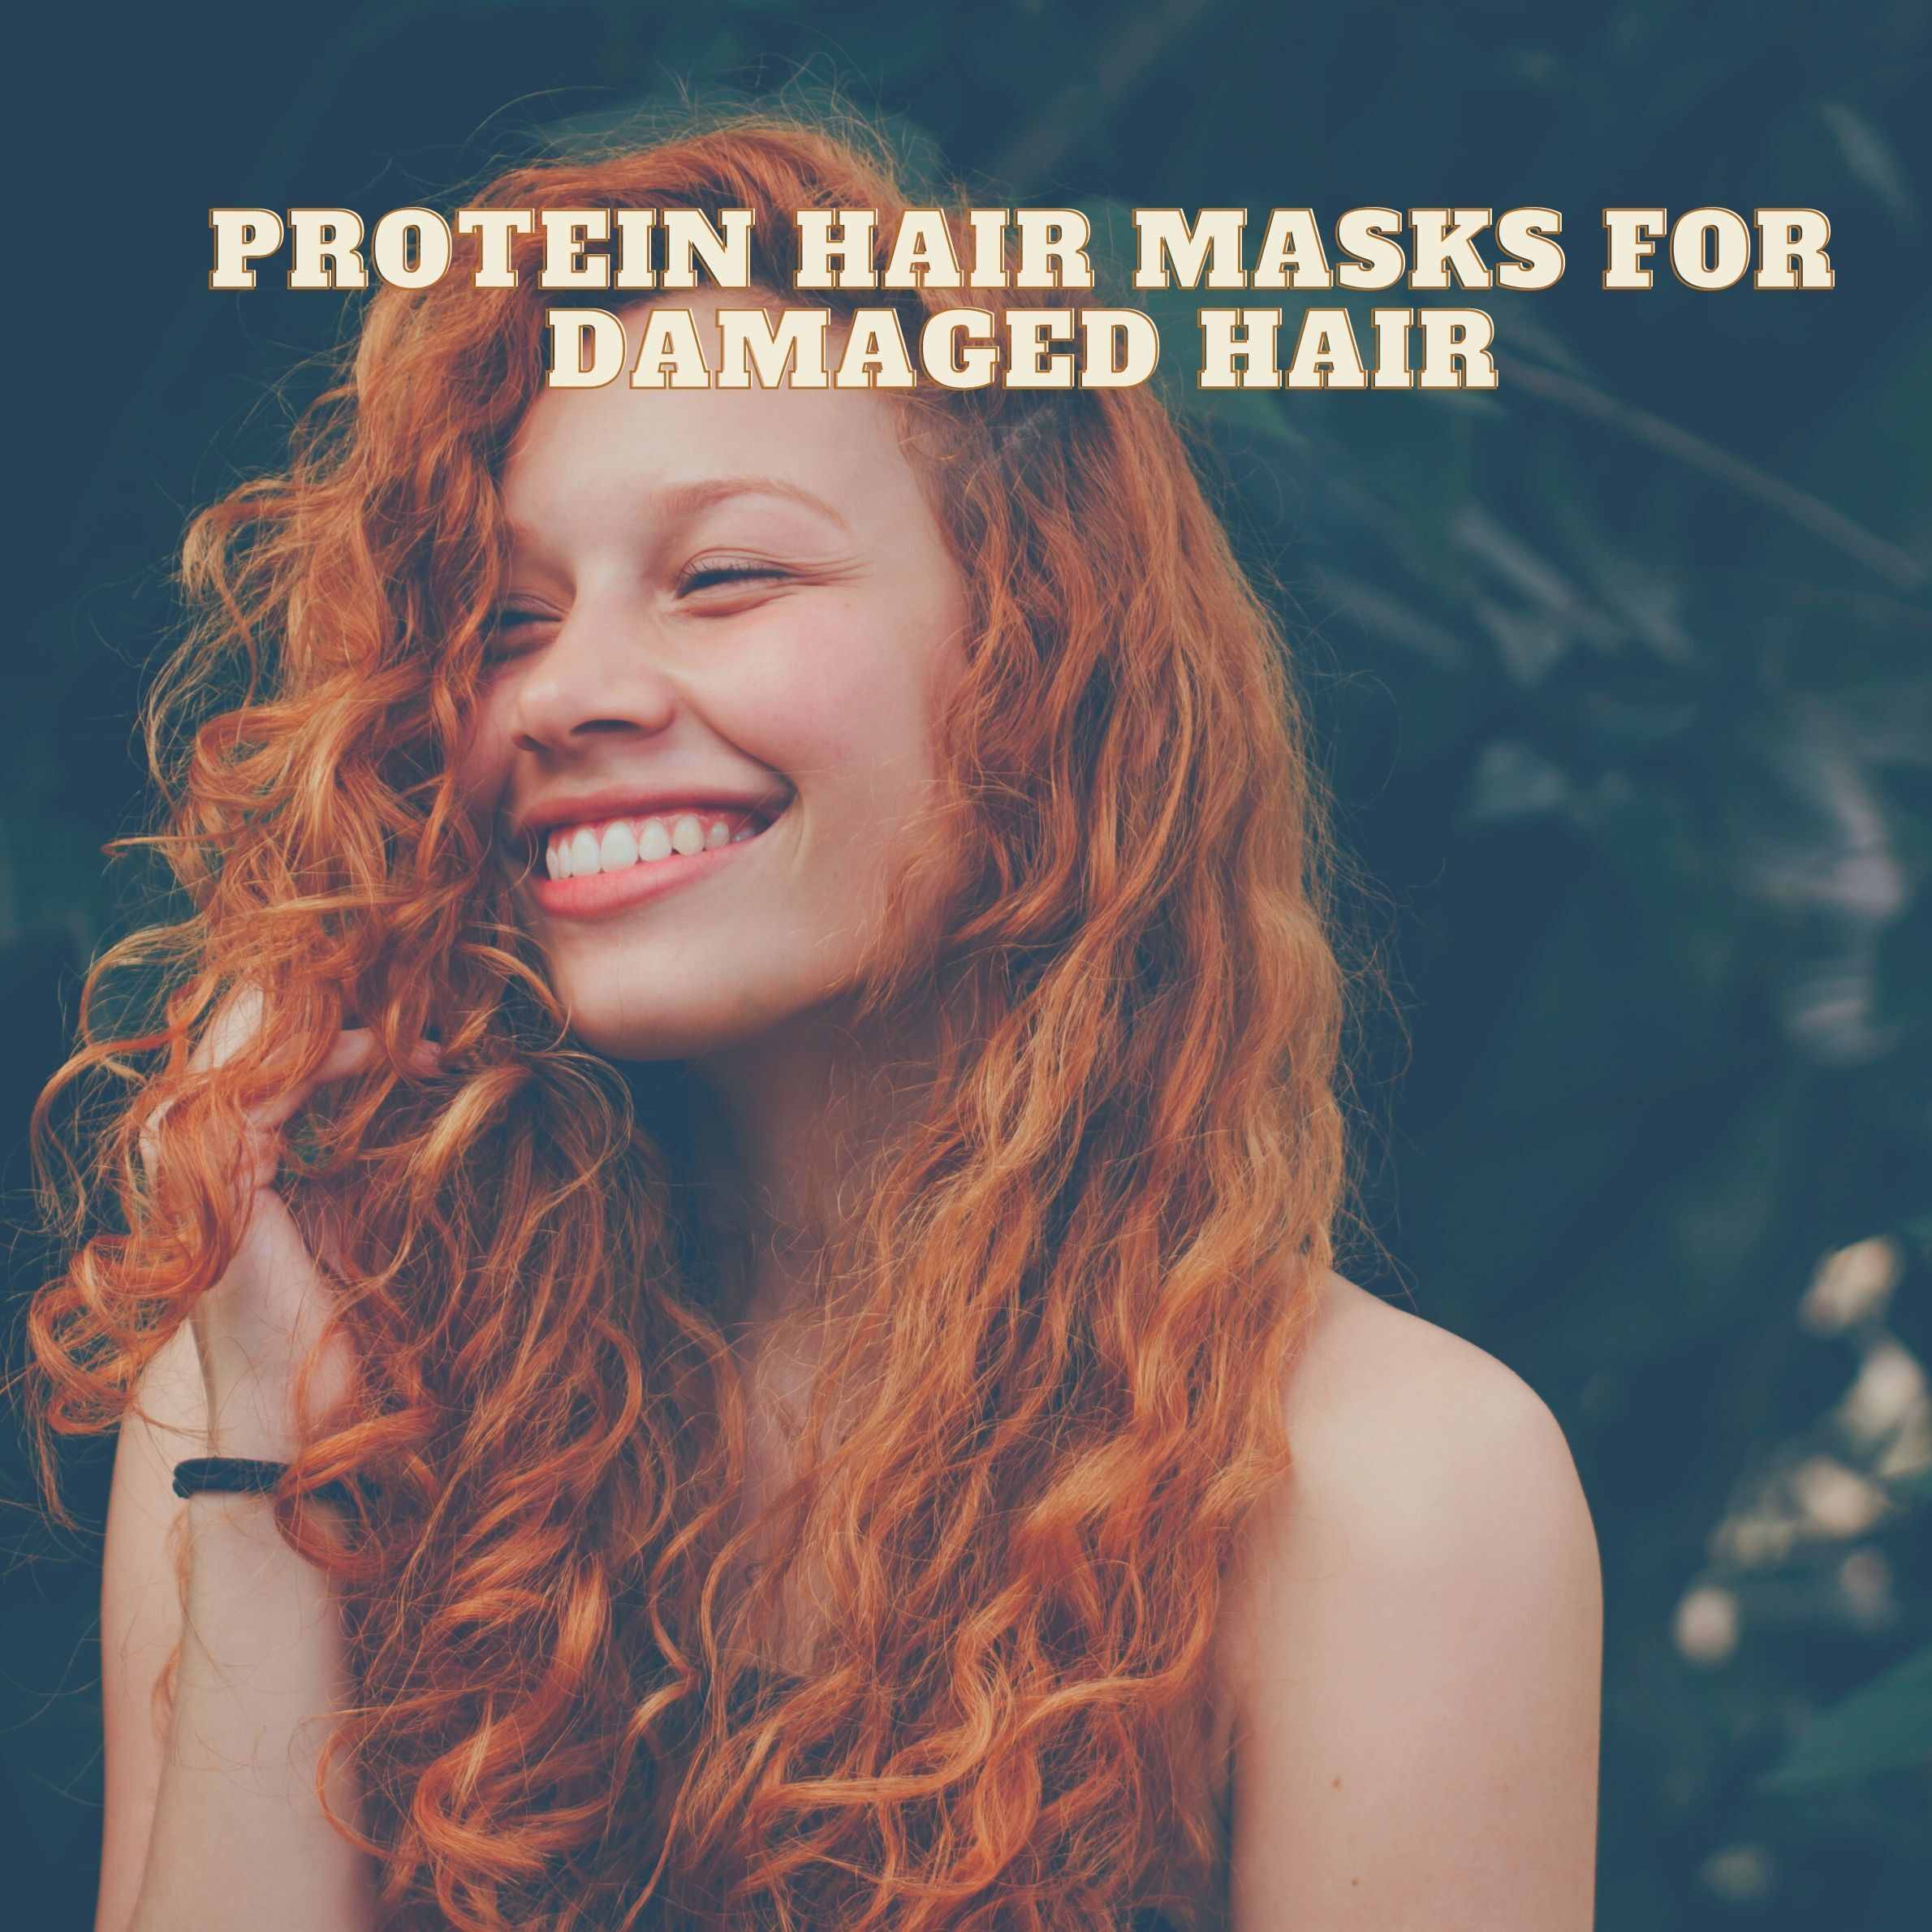 The 9 Best Protein Hair Masks for Damaged Hair 2023 - Hair Everyday Review